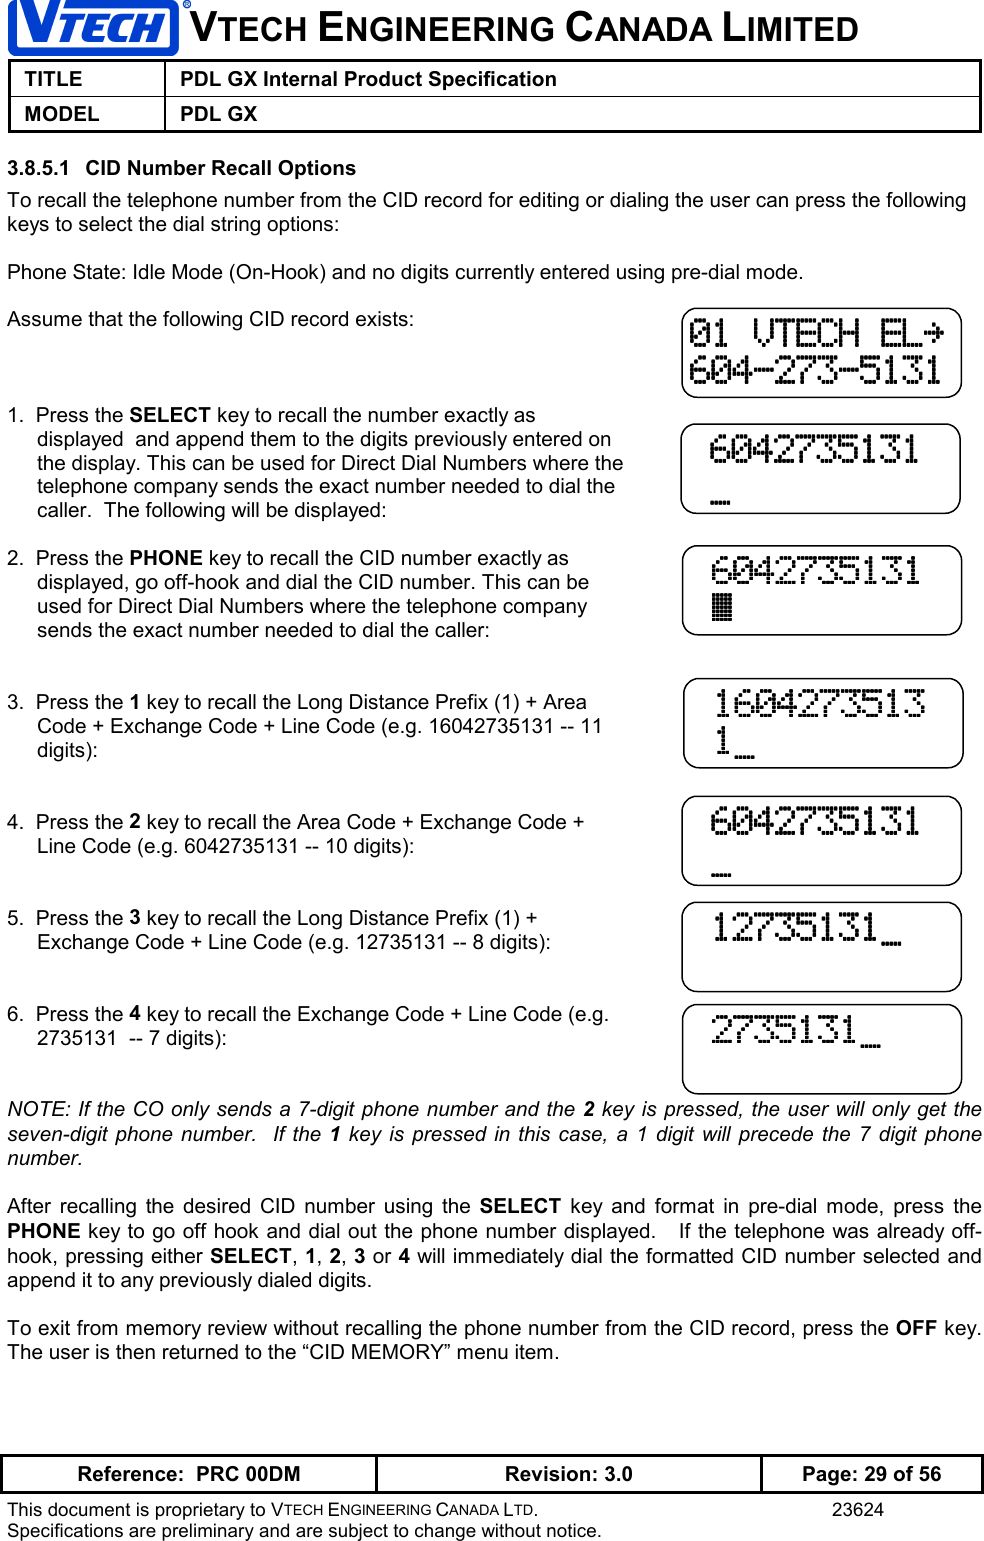 VTECH ENGINEERING CANADA LIMITEDTITLE PDL GX Internal Product SpecificationMODEL PDL GXReference:  PRC 00DM Revision: 3.0 Page: 29 of 56This document is proprietary to VTECH ENGINEERING CANADA LTD. 23624Specifications are preliminary and are subject to change without notice.3.8.5.1  CID Number Recall OptionsTo recall the telephone number from the CID record for editing or dialing the user can press the followingkeys to select the dial string options:Phone State: Idle Mode (On-Hook) and no digits currently entered using pre-dial mode.Assume that the following CID record exists:1.  Press the SELECT key to recall the number exactly asdisplayed  and append them to the digits previously entered onthe display. This can be used for Direct Dial Numbers where thetelephone company sends the exact number needed to dial thecaller.  The following will be displayed:2.  Press the PHONE key to recall the CID number exactly asdisplayed, go off-hook and dial the CID number. This can beused for Direct Dial Numbers where the telephone companysends the exact number needed to dial the caller:3.  Press the 1 key to recall the Long Distance Prefix (1) + AreaCode + Exchange Code + Line Code (e.g. 16042735131 -- 11digits):4.  Press the 2 key to recall the Area Code + Exchange Code +Line Code (e.g. 6042735131 -- 10 digits):5.  Press the 3 key to recall the Long Distance Prefix (1) +Exchange Code + Line Code (e.g. 12735131 -- 8 digits):6.  Press the 4 key to recall the Exchange Code + Line Code (e.g.2735131  -- 7 digits):NOTE: If the CO only sends a 7-digit phone number and the 2 key is pressed, the user will only get theseven-digit phone number.  If the 1 key is pressed in this case, a 1 digit will precede the 7 digit phonenumber.After recalling the desired CID number using the SELECT key and format in pre-dial mode, press thePHONE key to go off hook and dial out the phone number displayed.   If the telephone was already off-hook, pressing either SELECT, 1, 2, 3 or 4 will immediately dial the formatted CID number selected andappend it to any previously dialed digits.To exit from memory review without recalling the phone number from the CID record, press the OFF key.The user is then returned to the “CID MEMORY” menu item.01 VTECH EL~01 VTECH EL~01 VTECH EL~01 VTECH EL~604-273-5131604-273-5131604-273-5131604-273-5131 6042735131 6042735131 6042735131 6042735131 _ _ _ _ 6042735131 6042735131 6042735131 6042735131 _ _ _ _ 12735131_ 12735131_ 12735131_ 12735131_ 6042735131 6042735131 6042735131 6042735131 \ \ \ \ 1604273513 1604273513 1604273513 1604273513 1_ 1_ 1_ 1_ 2735131_ 2735131_ 2735131_ 2735131_